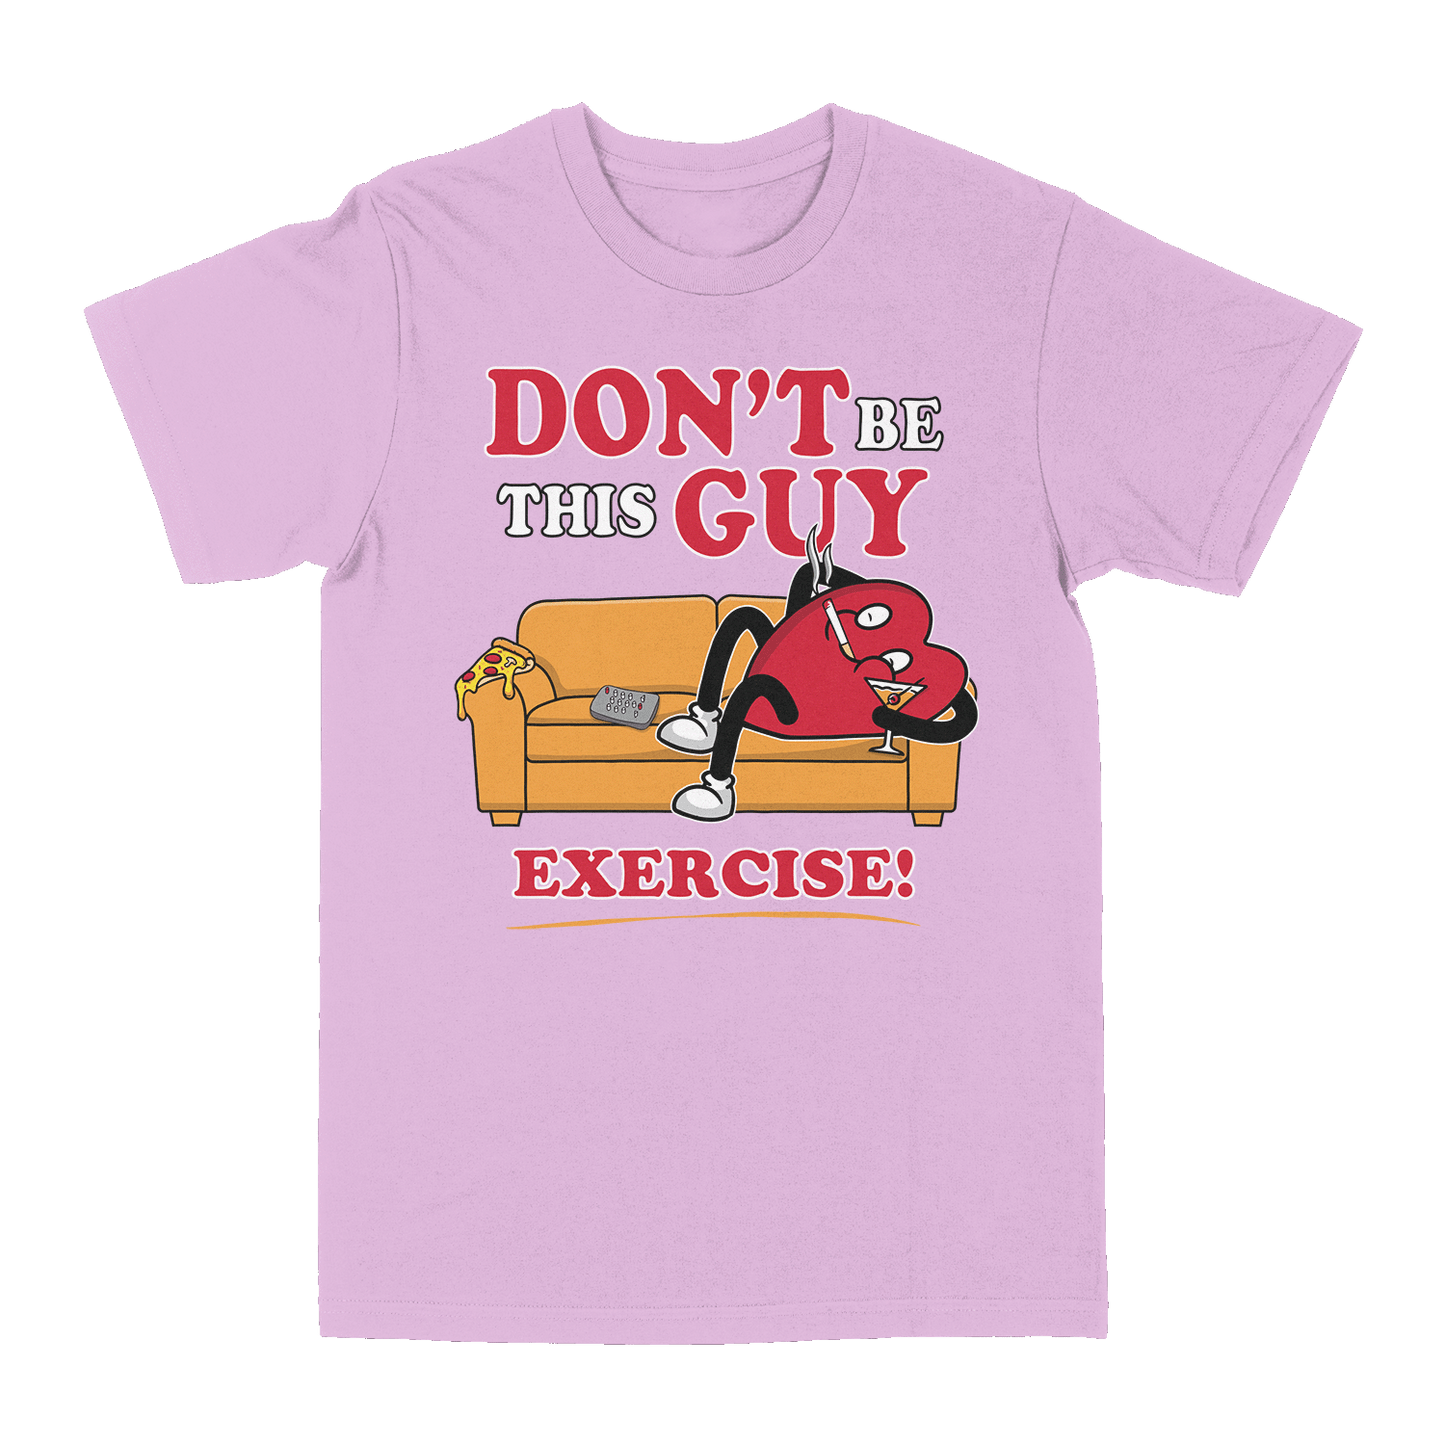 Exercise! (Don't be this guy) Unisex Shirt